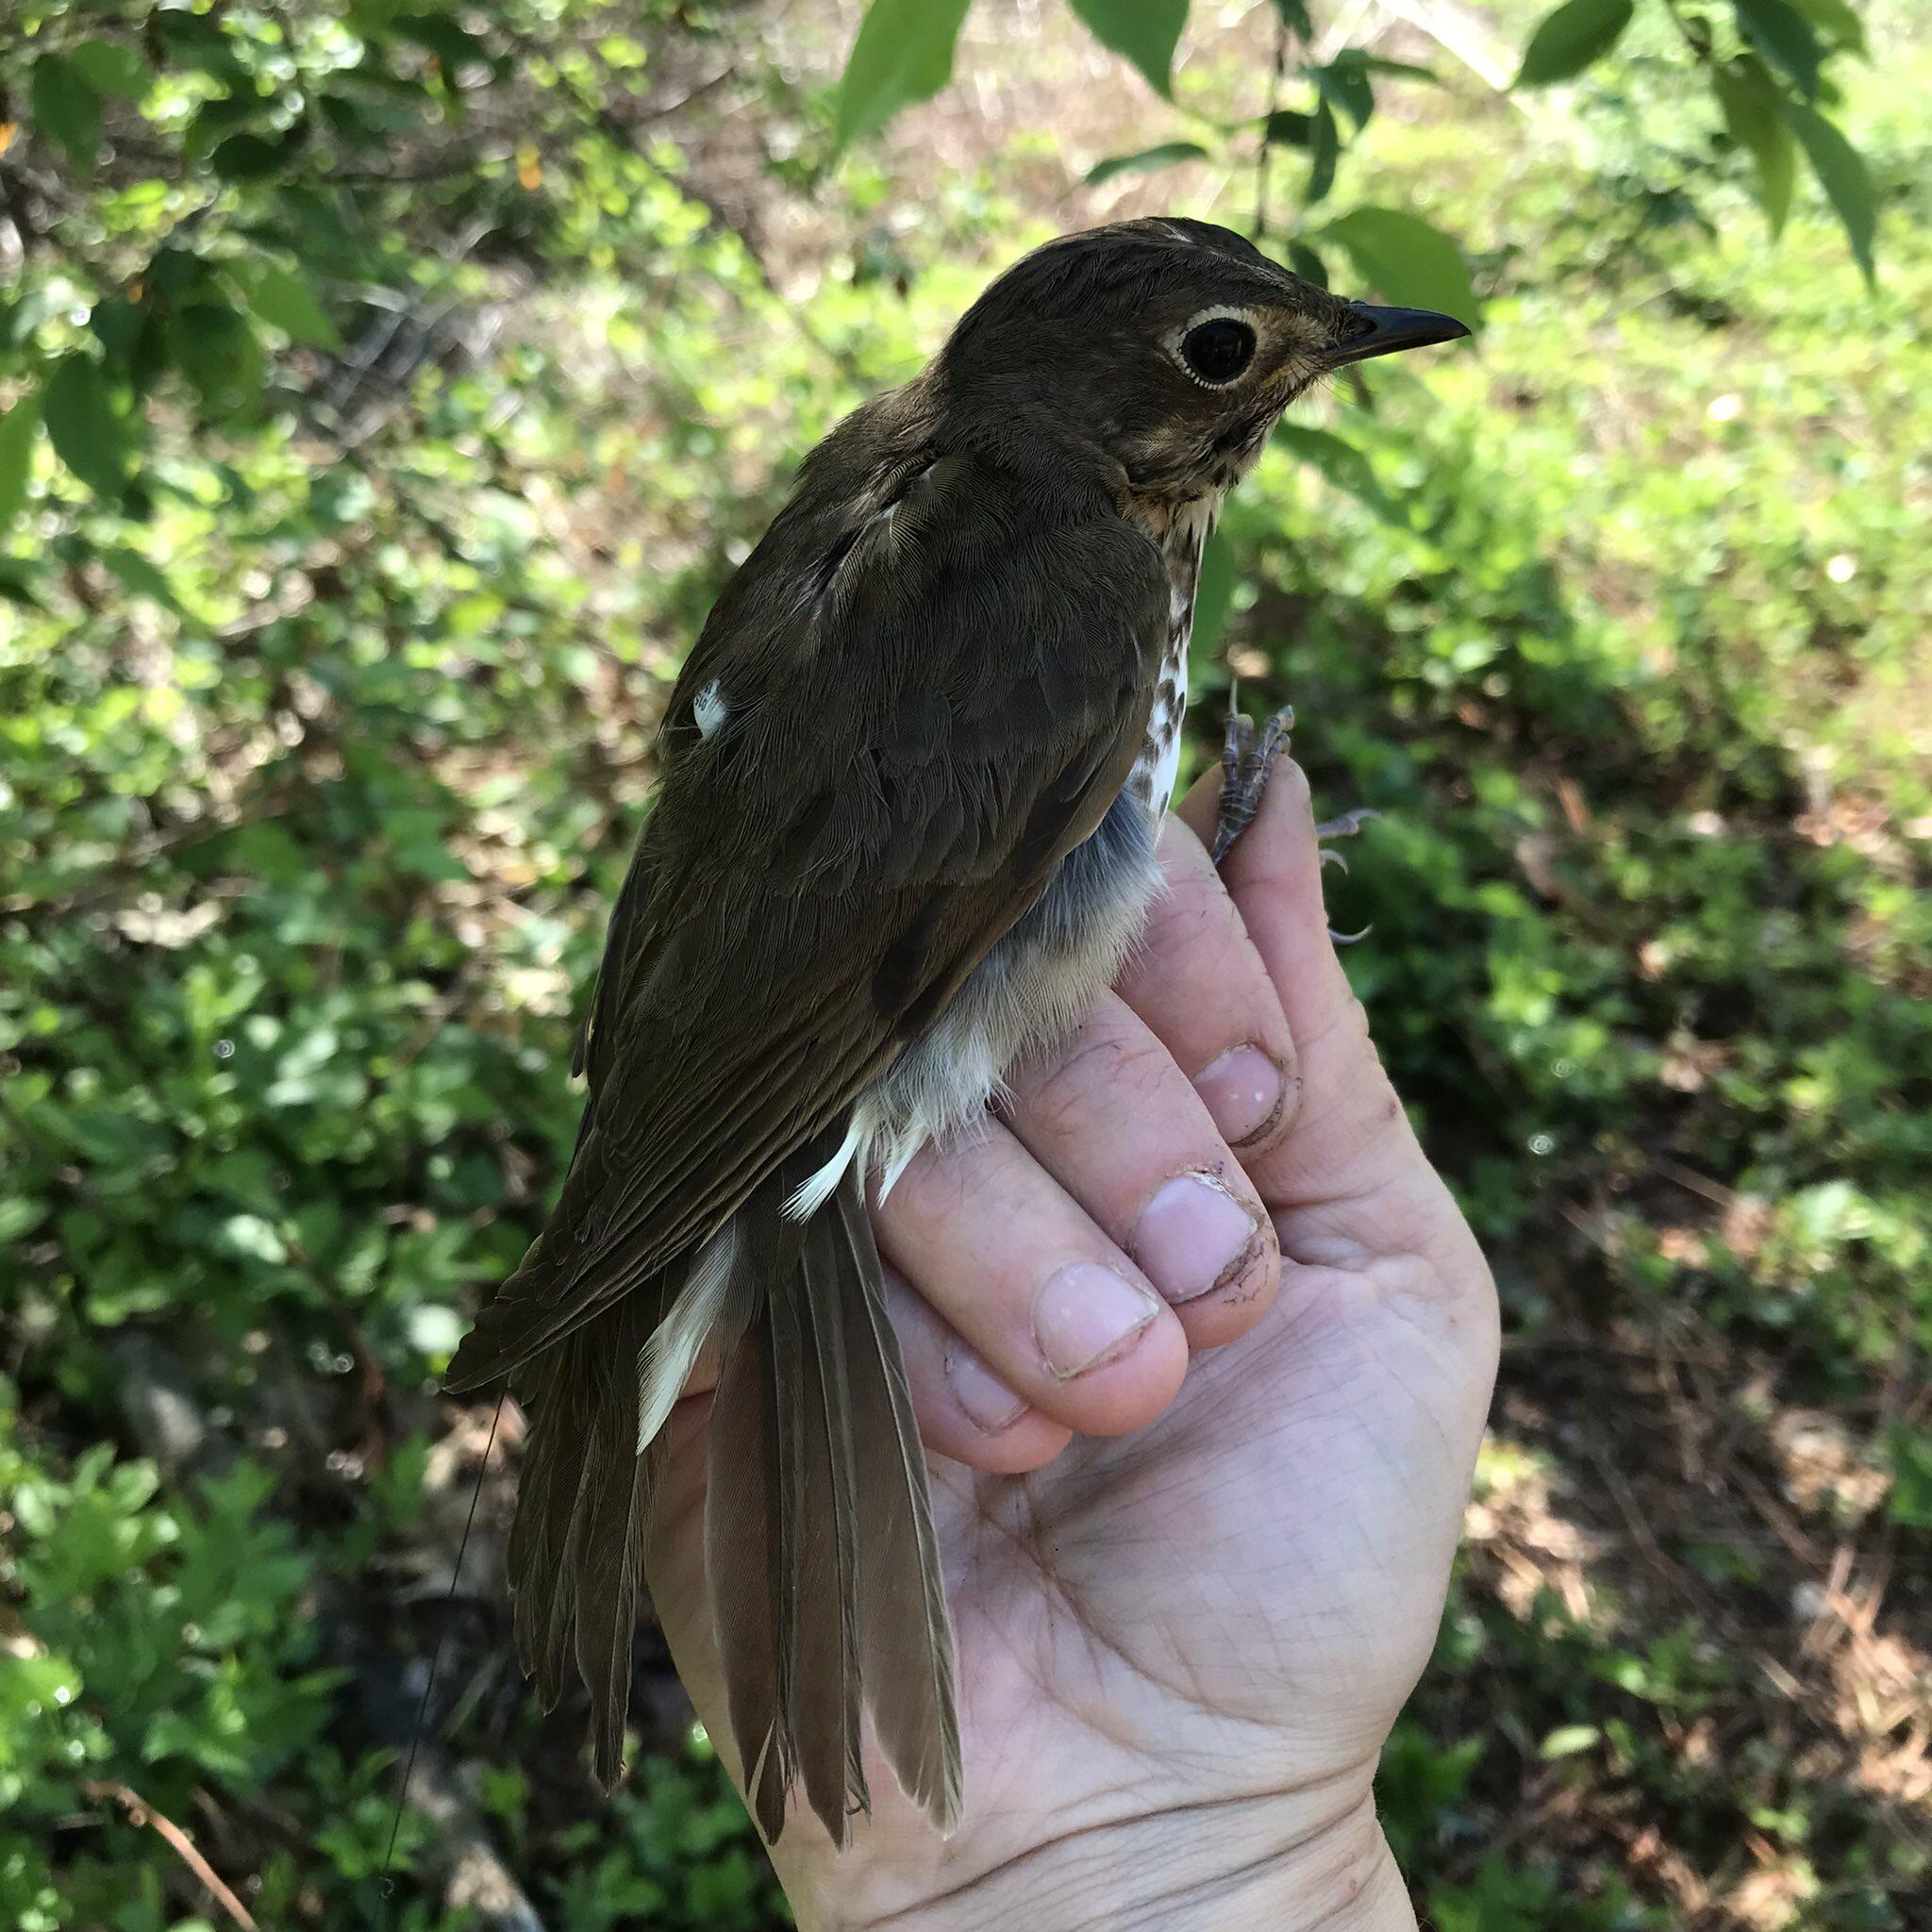 A bander holds a Swainson's Thrush in their hand